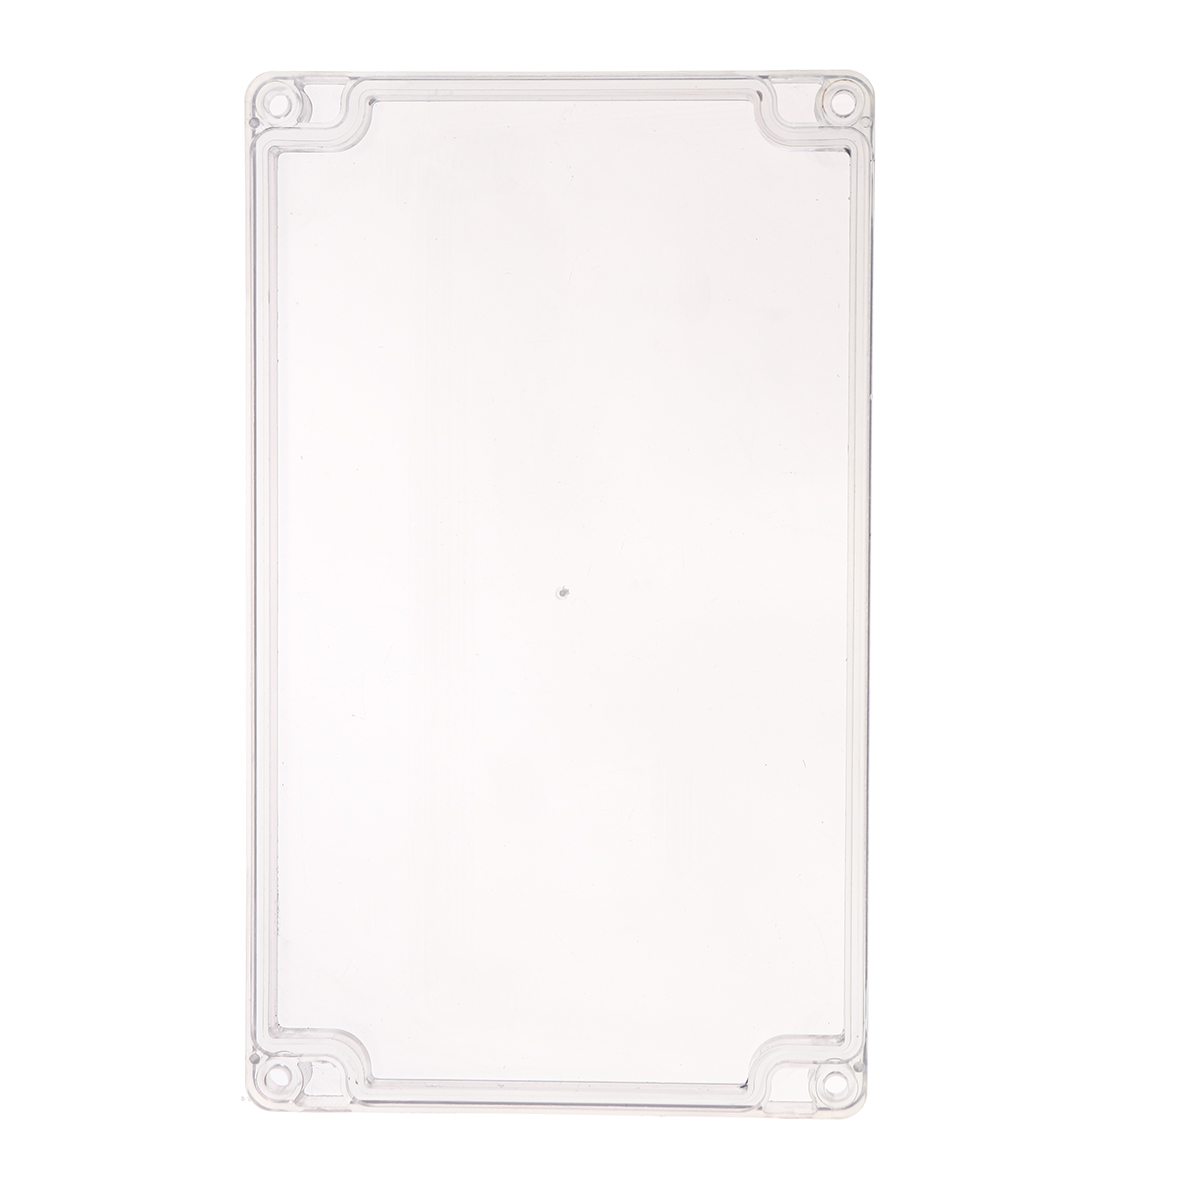 Find Plastic Waterproof Electronic Project Box Clear Cover Electronic Project Case 200 120 75mm for Sale on Gipsybee.com with cryptocurrencies